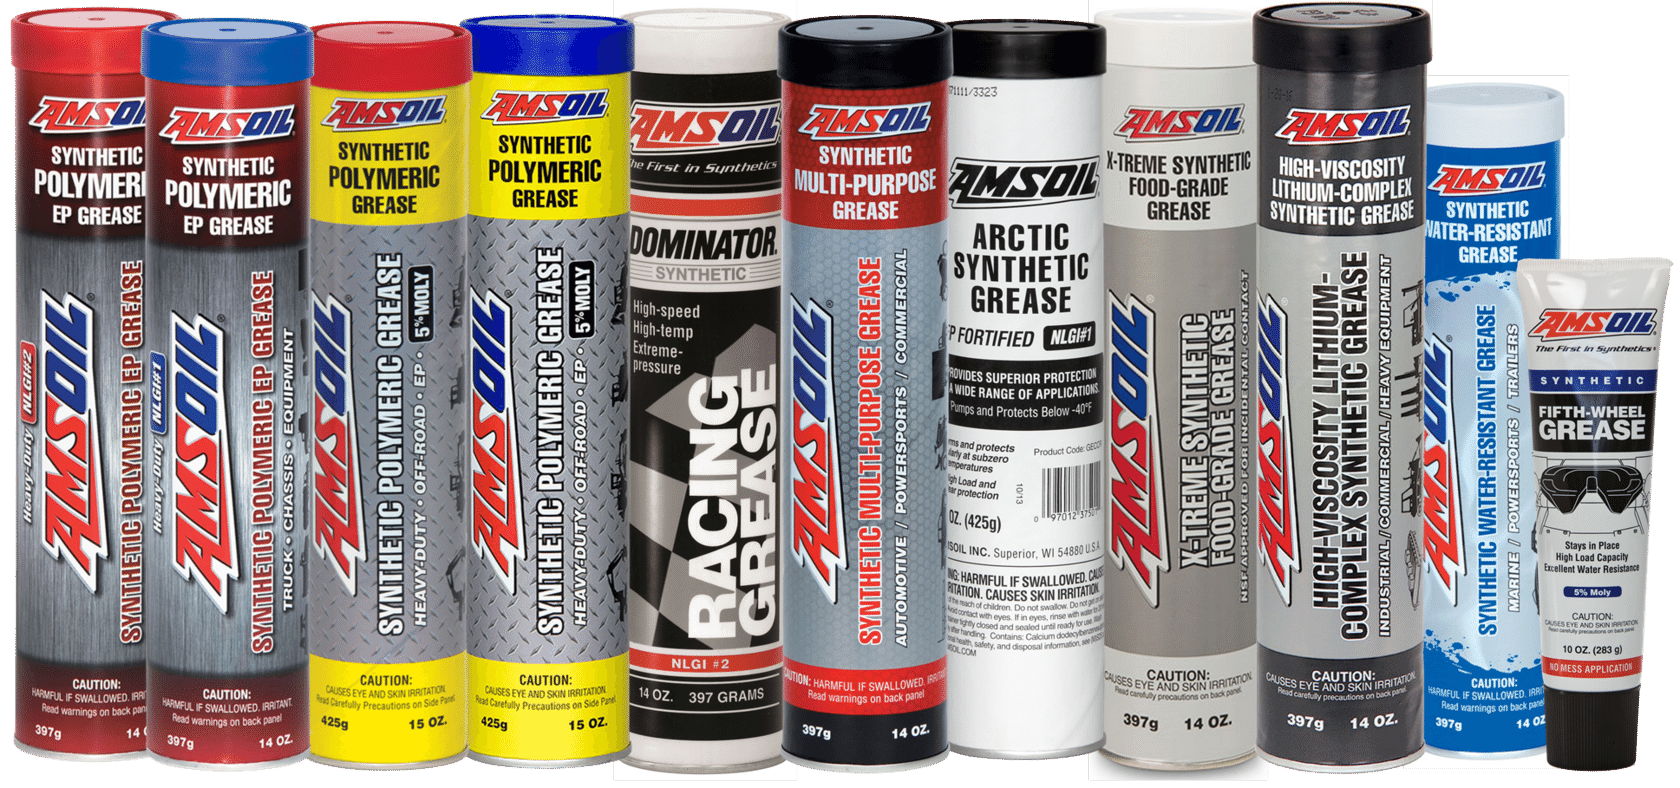 AMSOIL Synthetic Grease Products